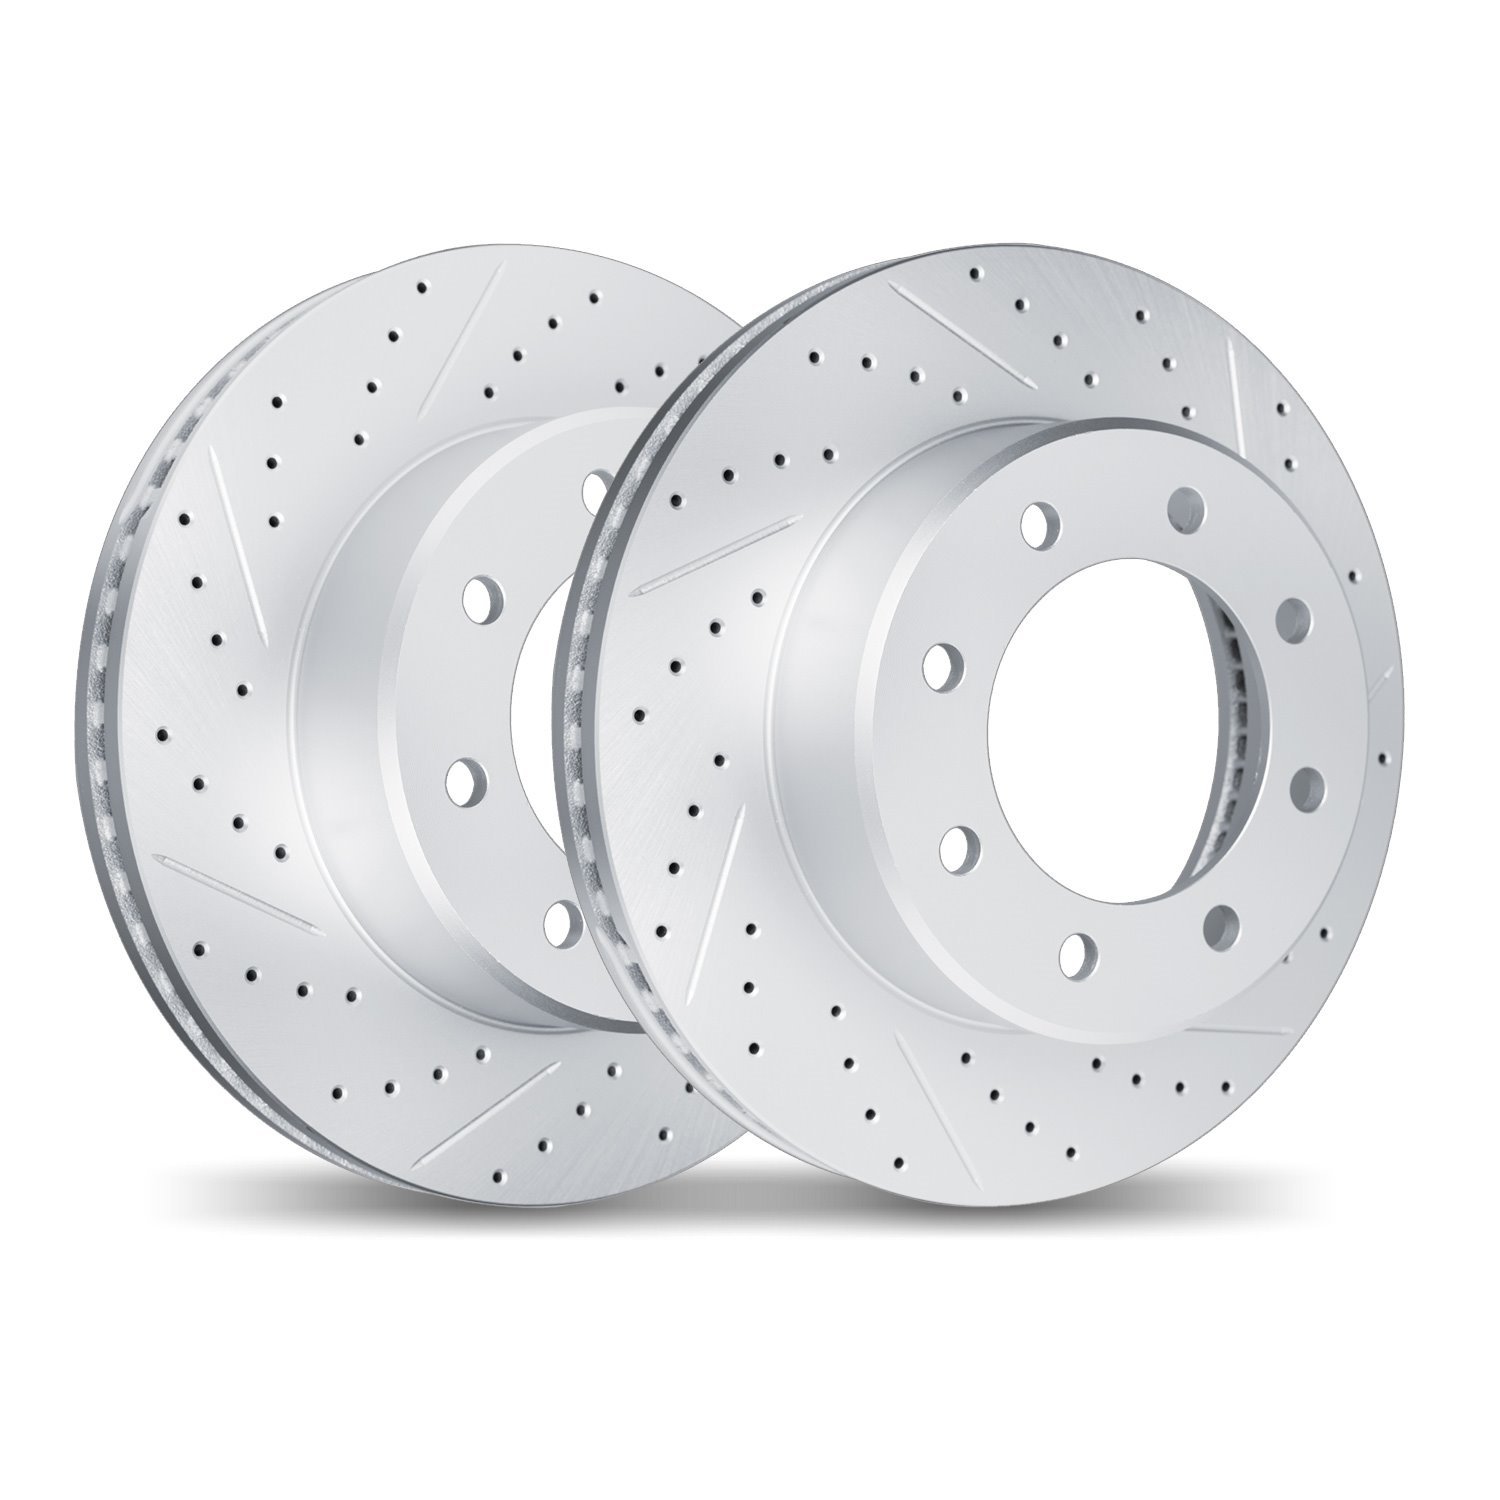 2002-54034 Geoperformance Drilled/Slotted Brake Rotors, 1999-2002 Ford/Lincoln/Mercury/Mazda, Position: Front